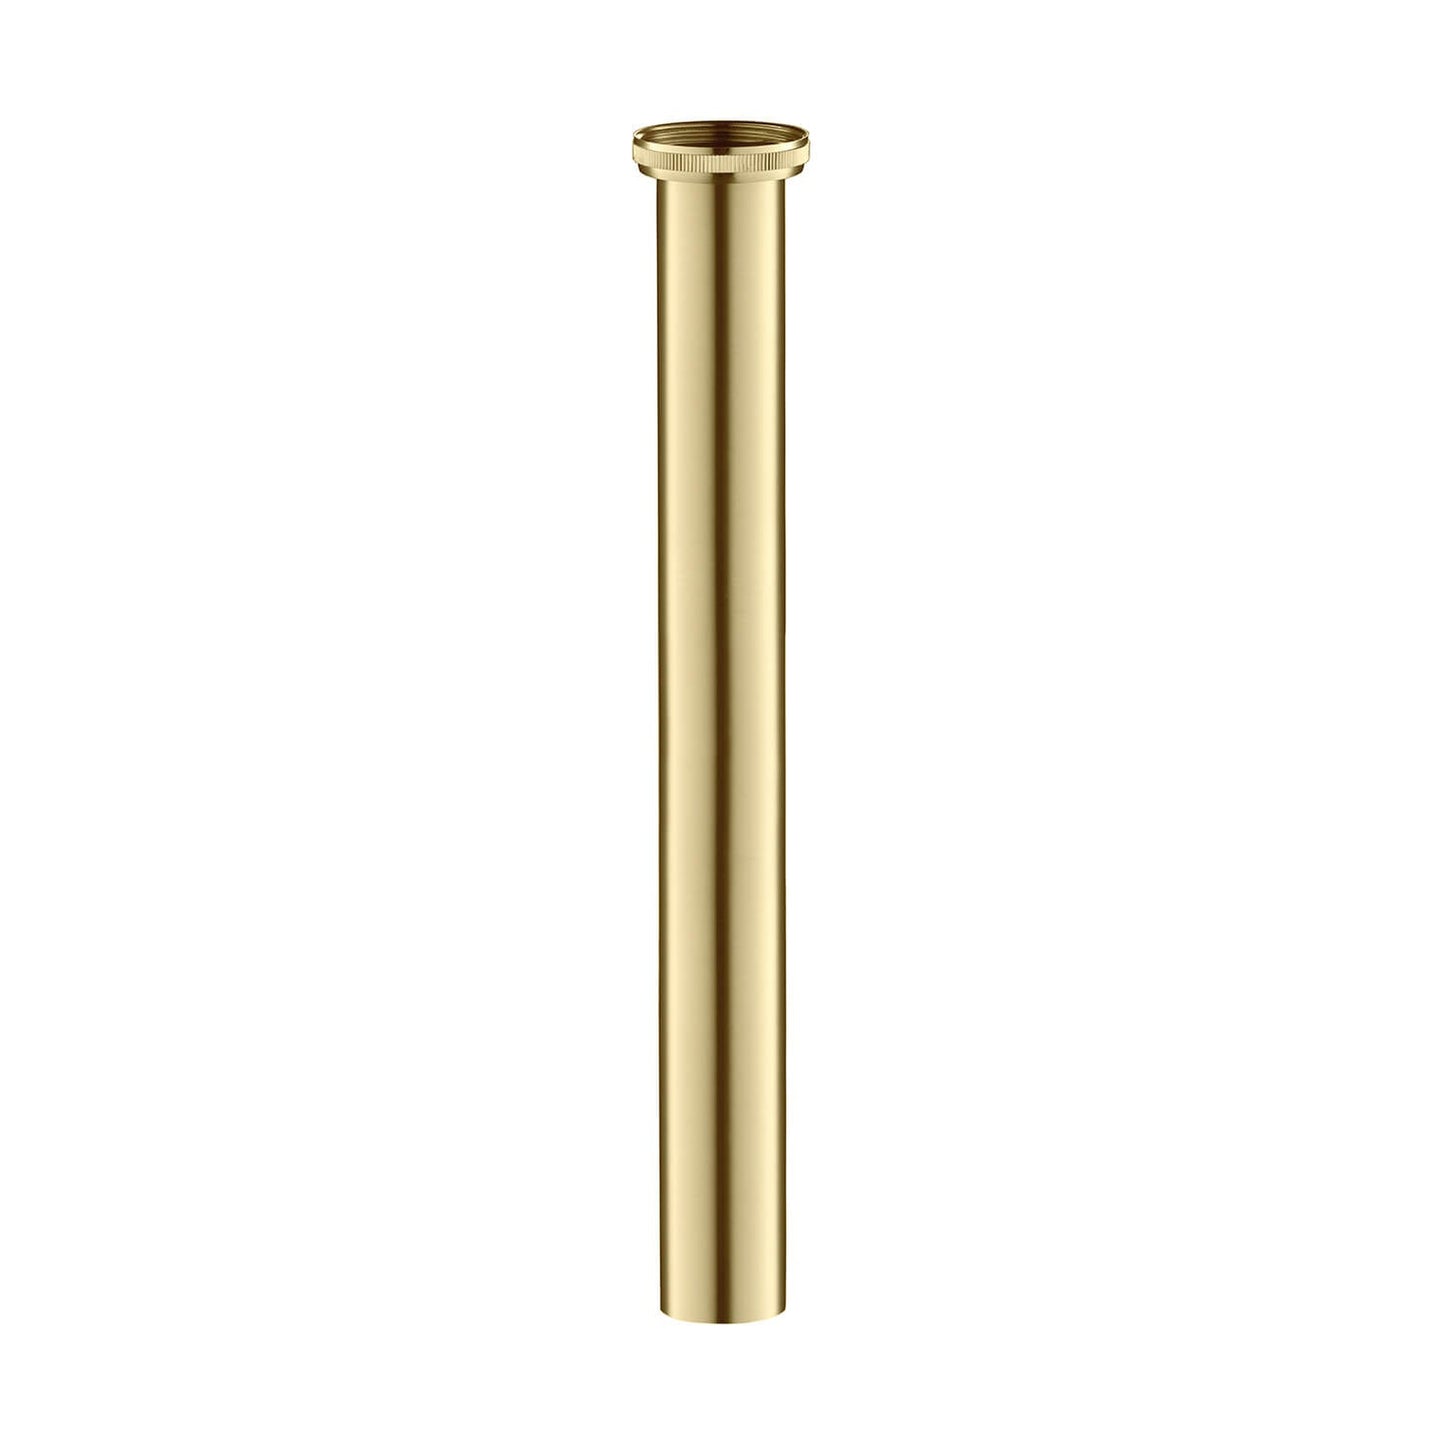 KIBI 1.25" x 12" Bathroom Sink Tailpiece Extension in Brushed Gold Finish